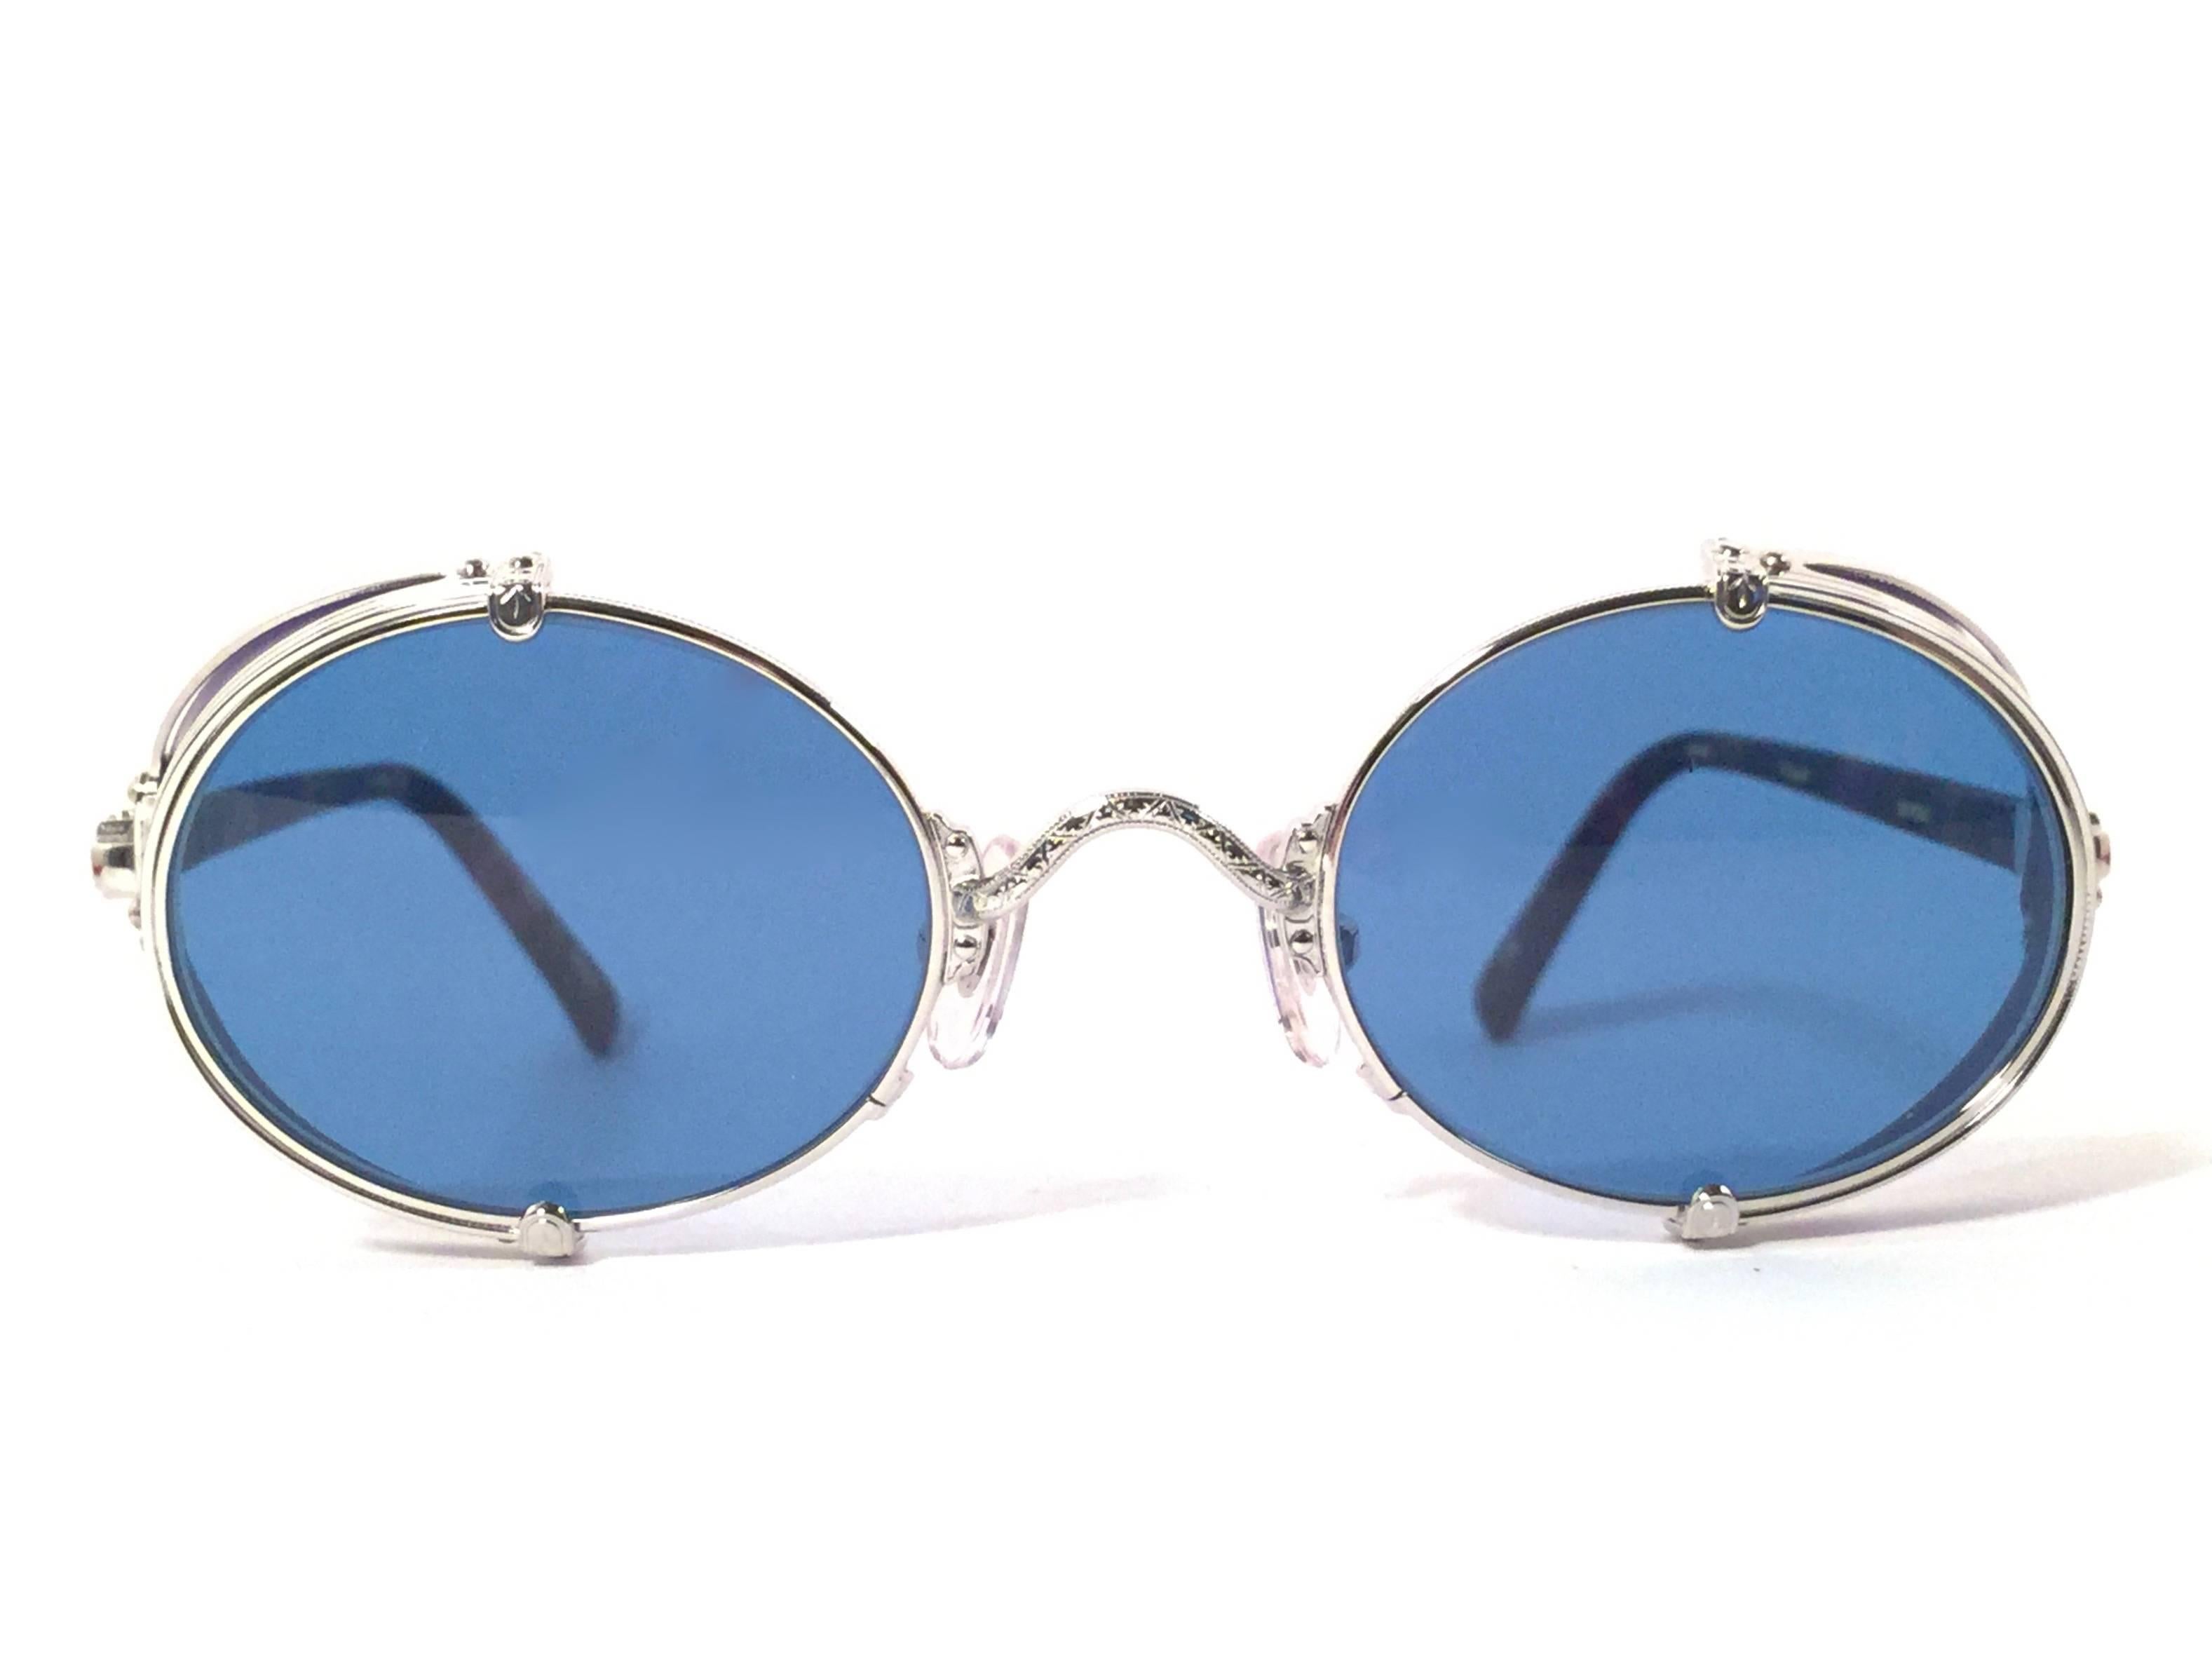 Cult brand Matsuda signed this ultra chic pair of round titanium with blue side cups sunglasses. 

Spotless blue lenses.

Superior quality and design. 

New, never worn or displayed. Made in japan.

